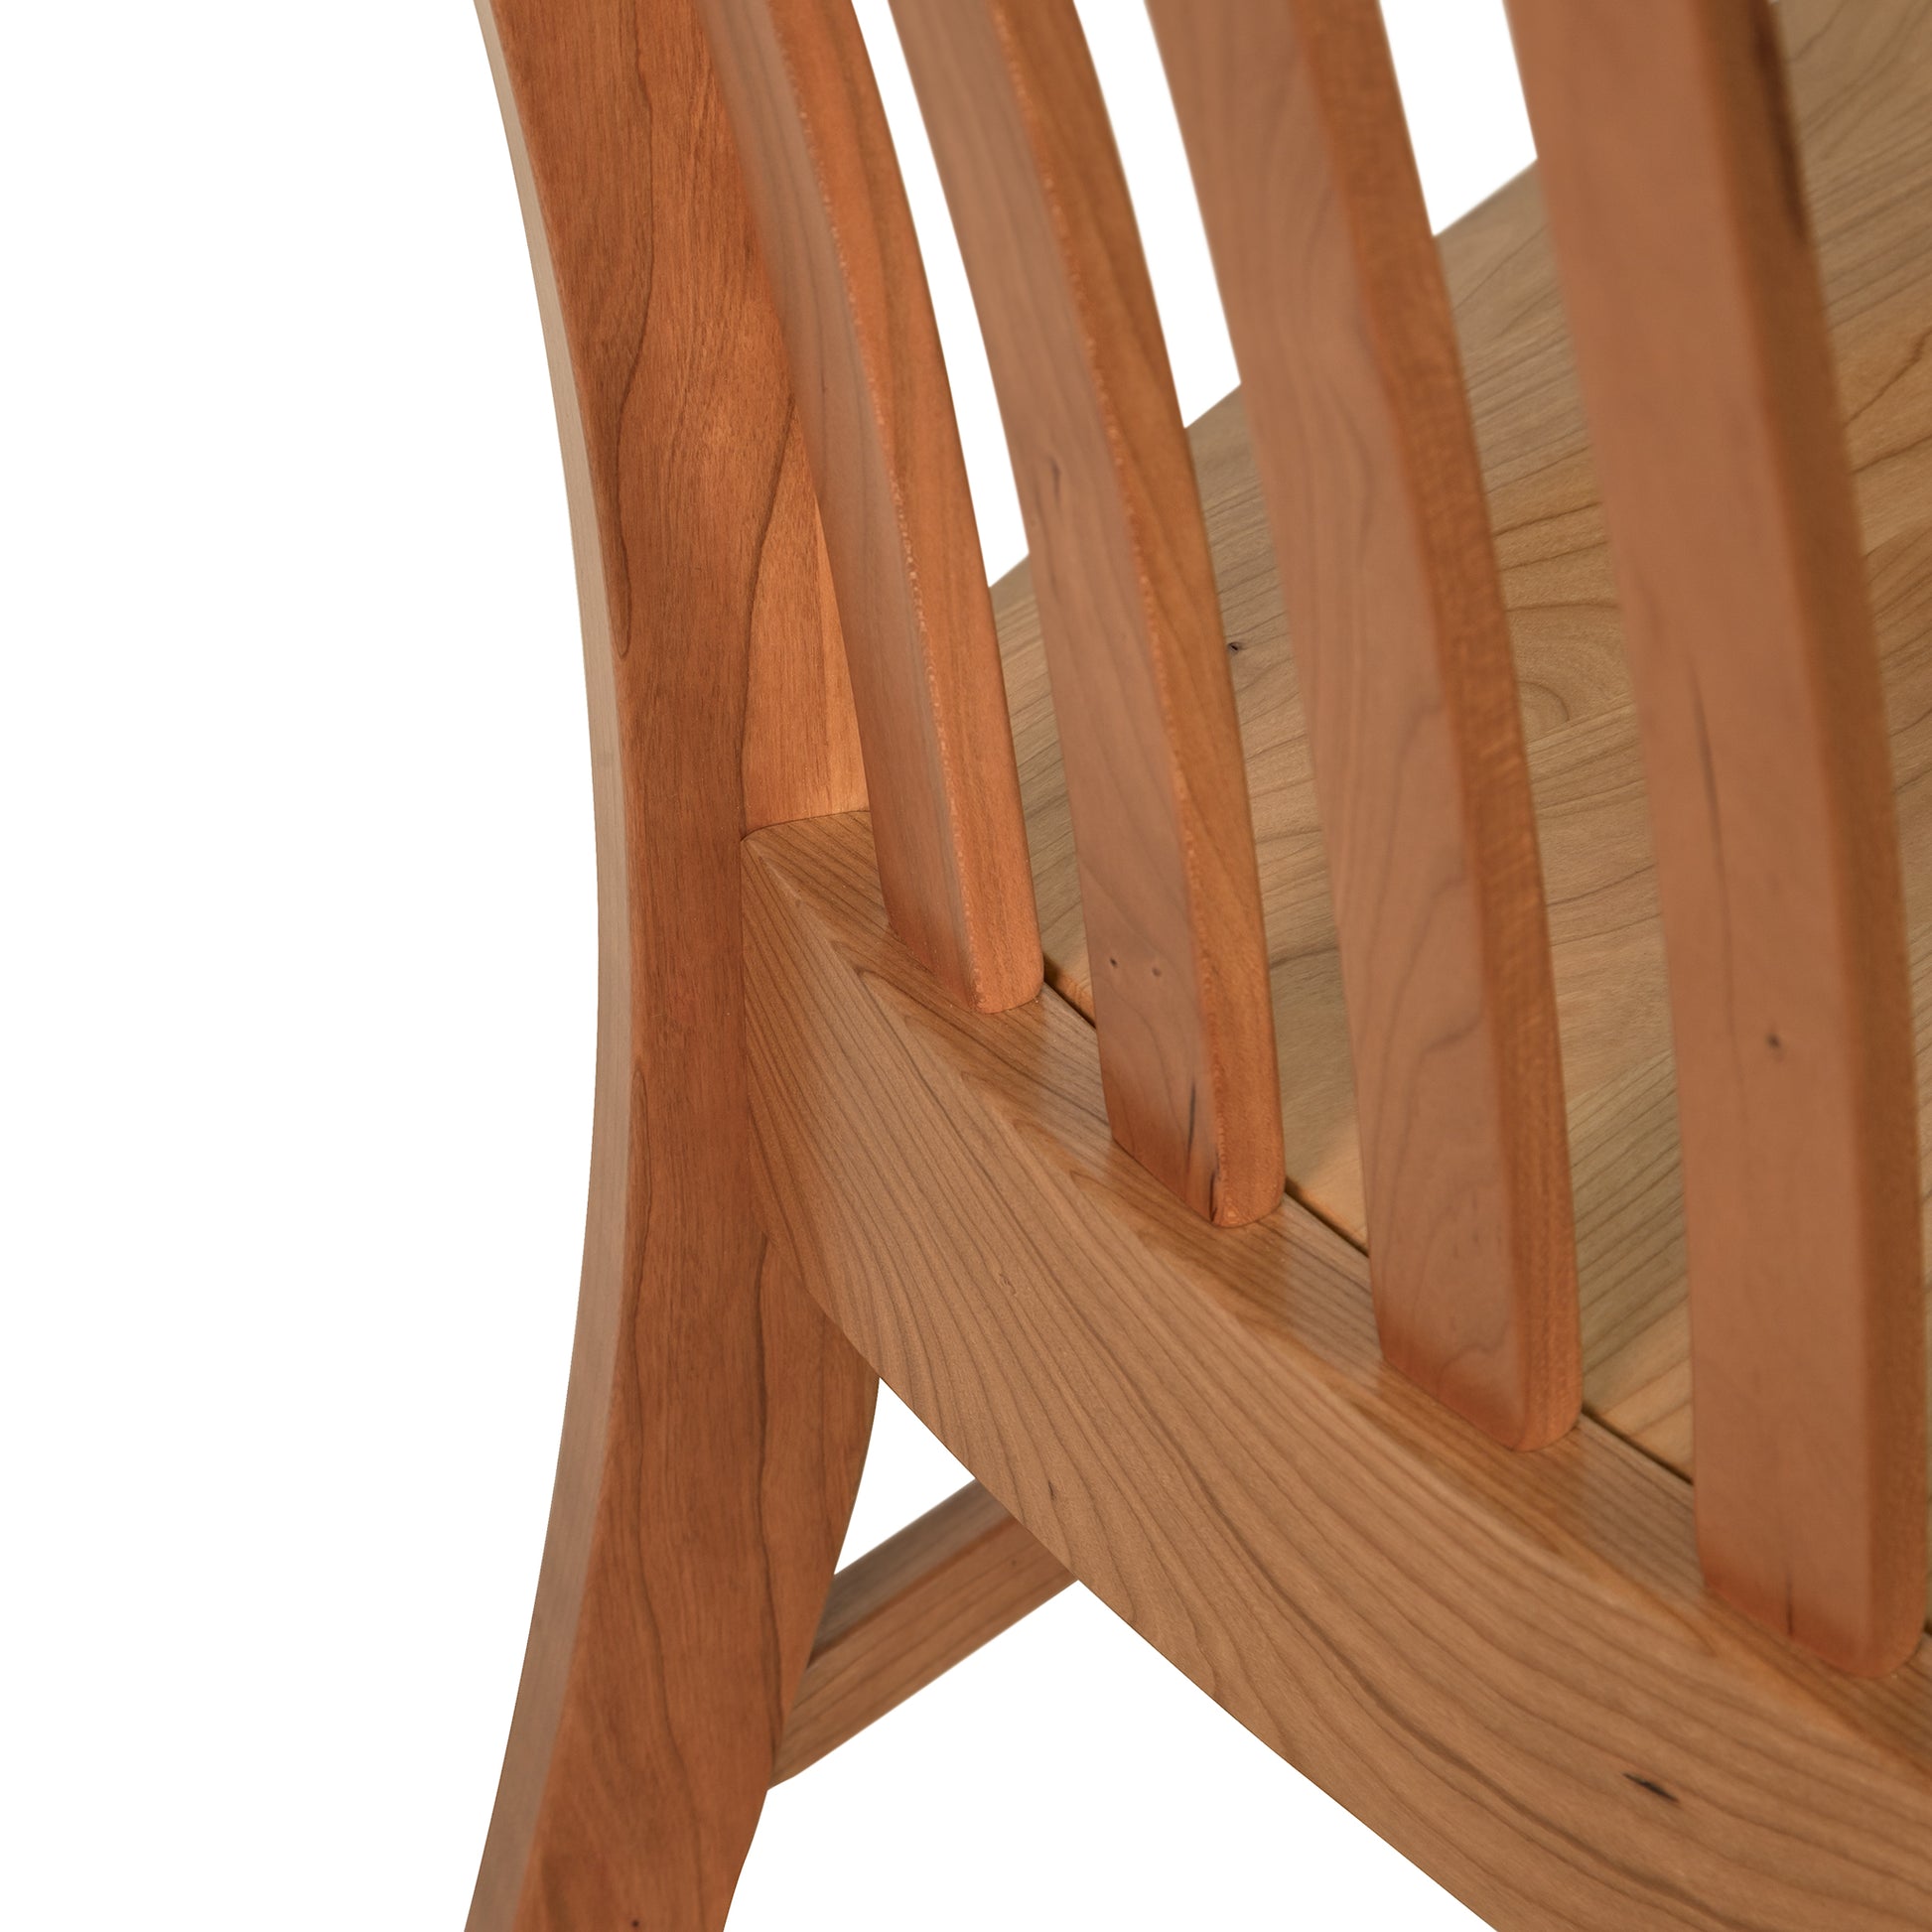 Close-up view of a Vermont Woods Studios Country Shaker Chair with Wood Seat showing detail of the seat and backrest slats with a focus on the joinery and wood grain.